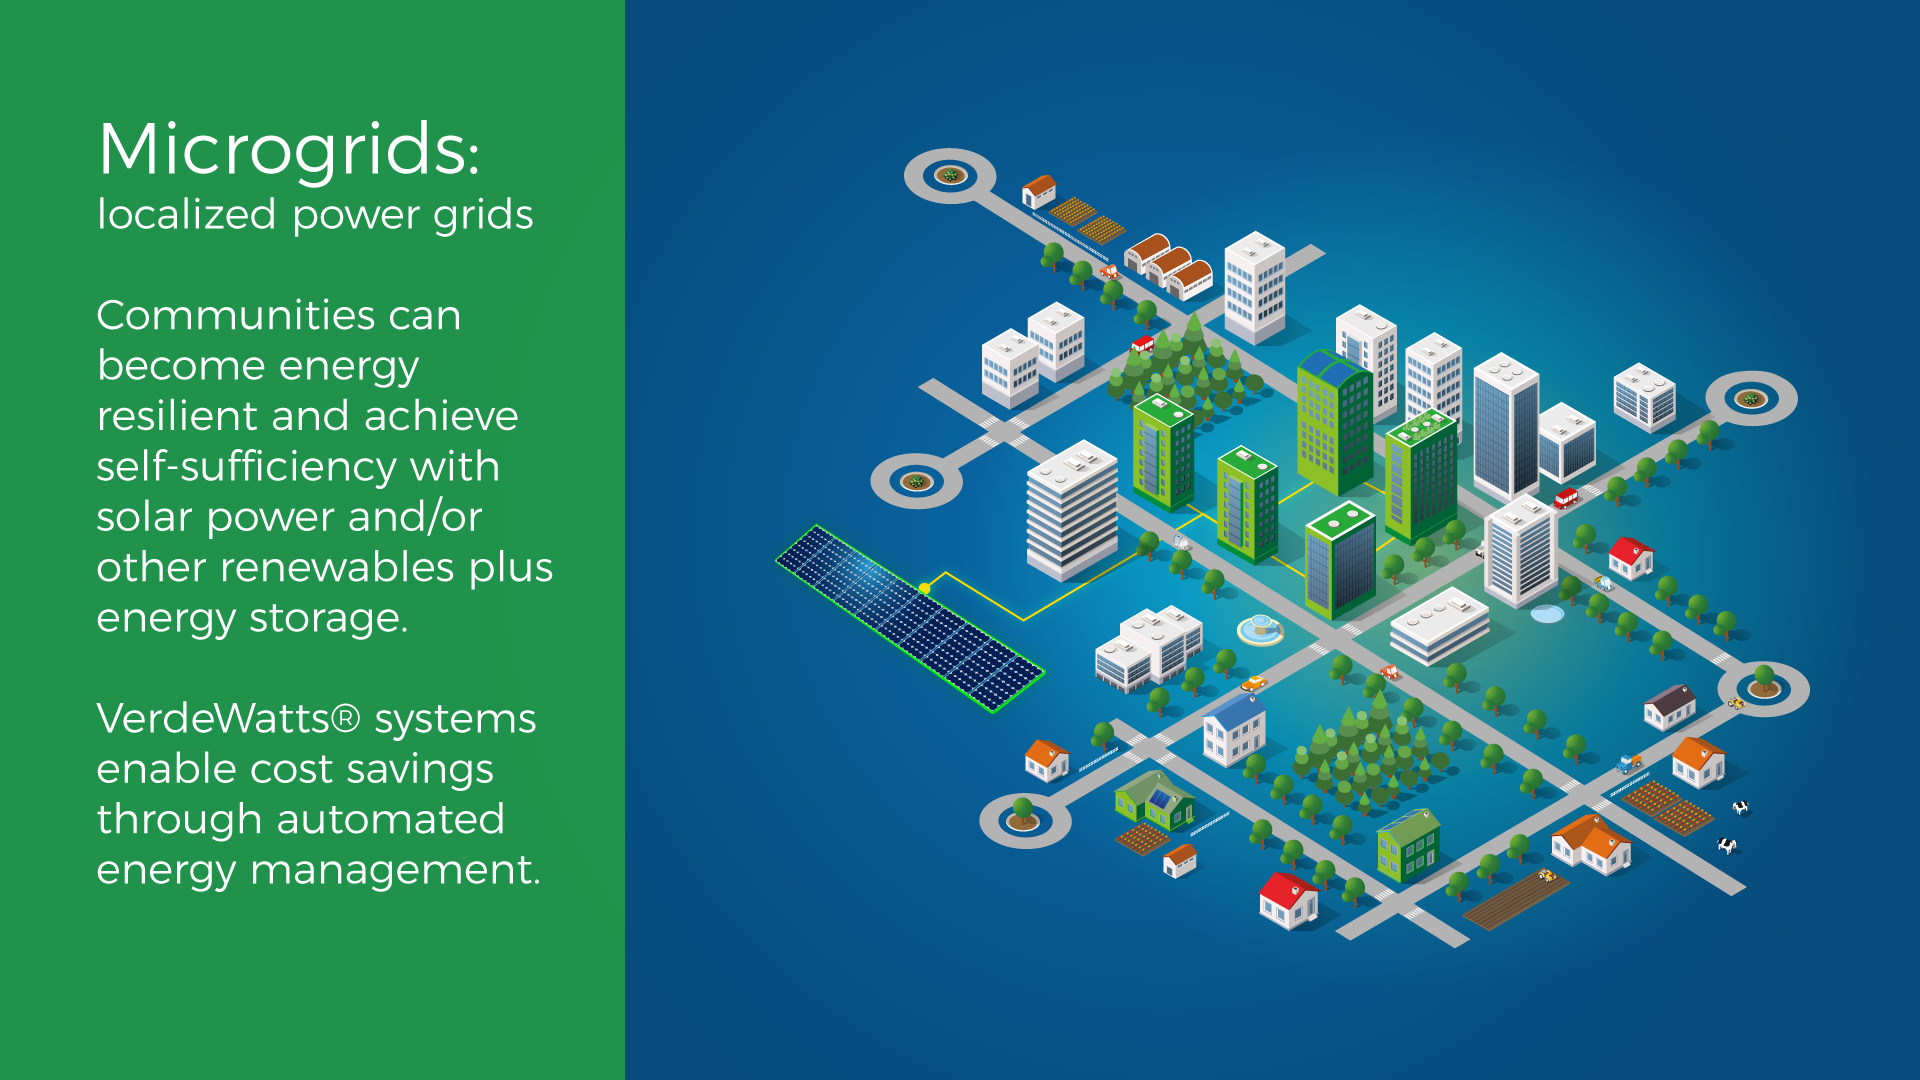 Microgrids are helping communities become energy self-sufficient and gain resilience